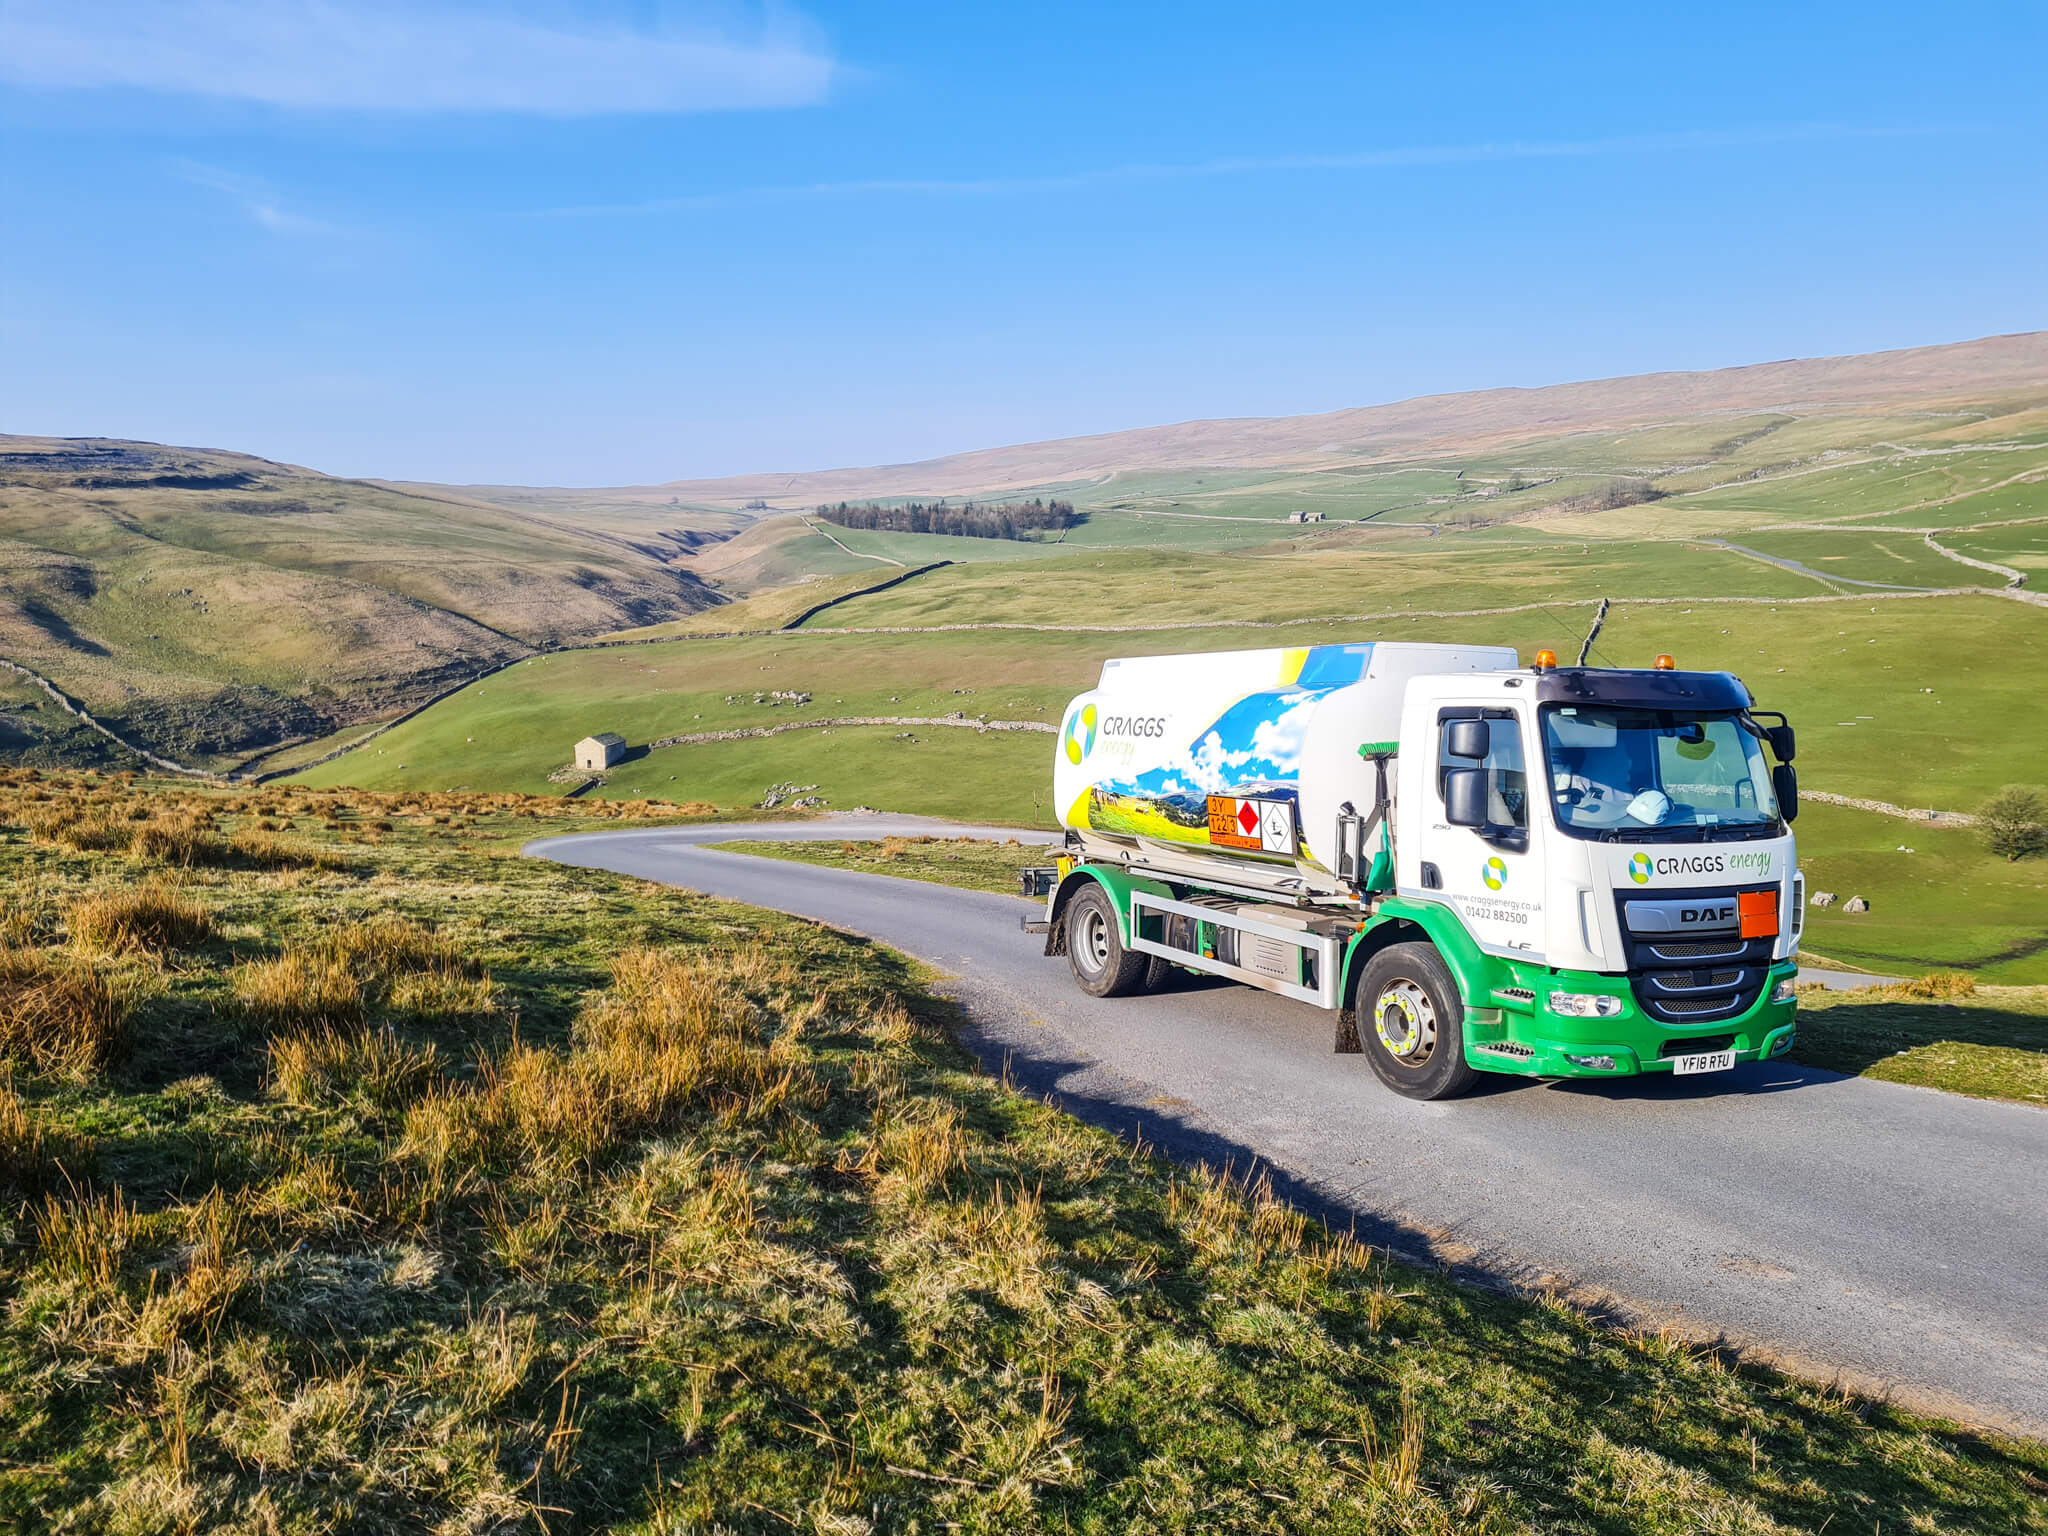 Craggs Energy tanker on a rural road with a home in the background and rolling green hills and a bright blue sky.